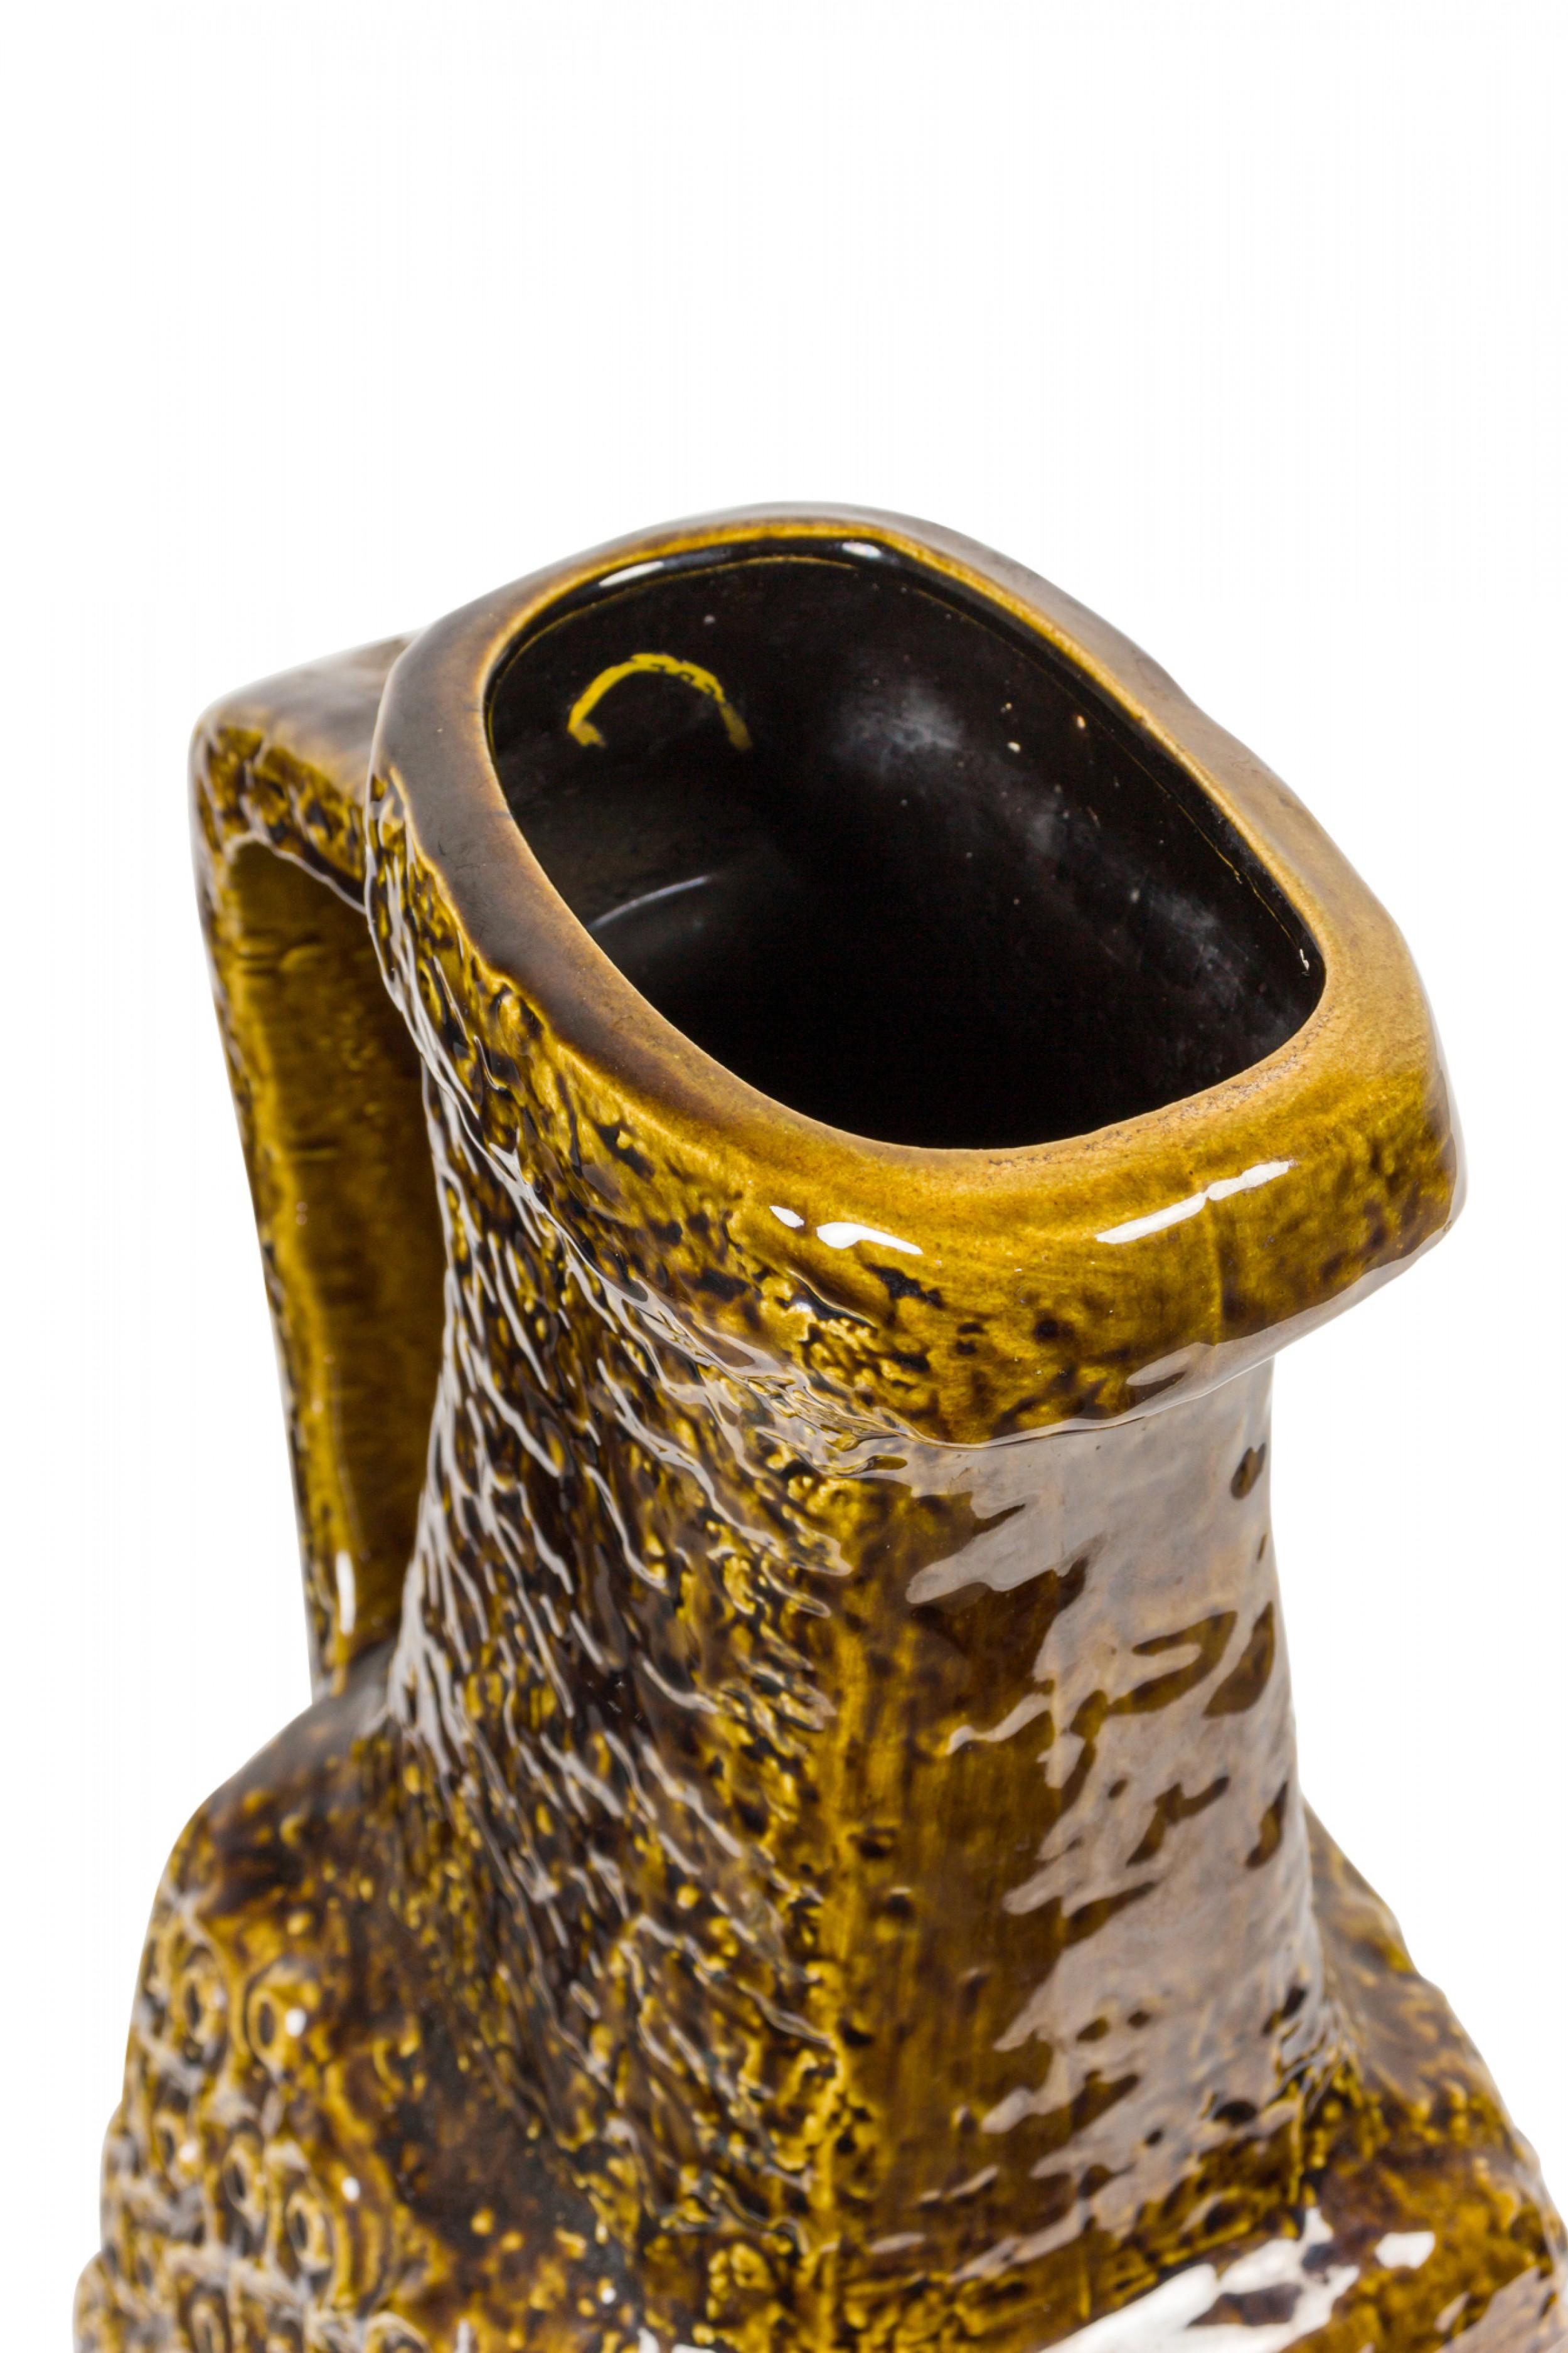 West German mid-century square base handled ceramic vase with a raised abstract nesting circle design around the base and a mottle black and yellow glaze. (BAY KERAMIK, mark on bottom, BAY W. GERMANY 265-40).